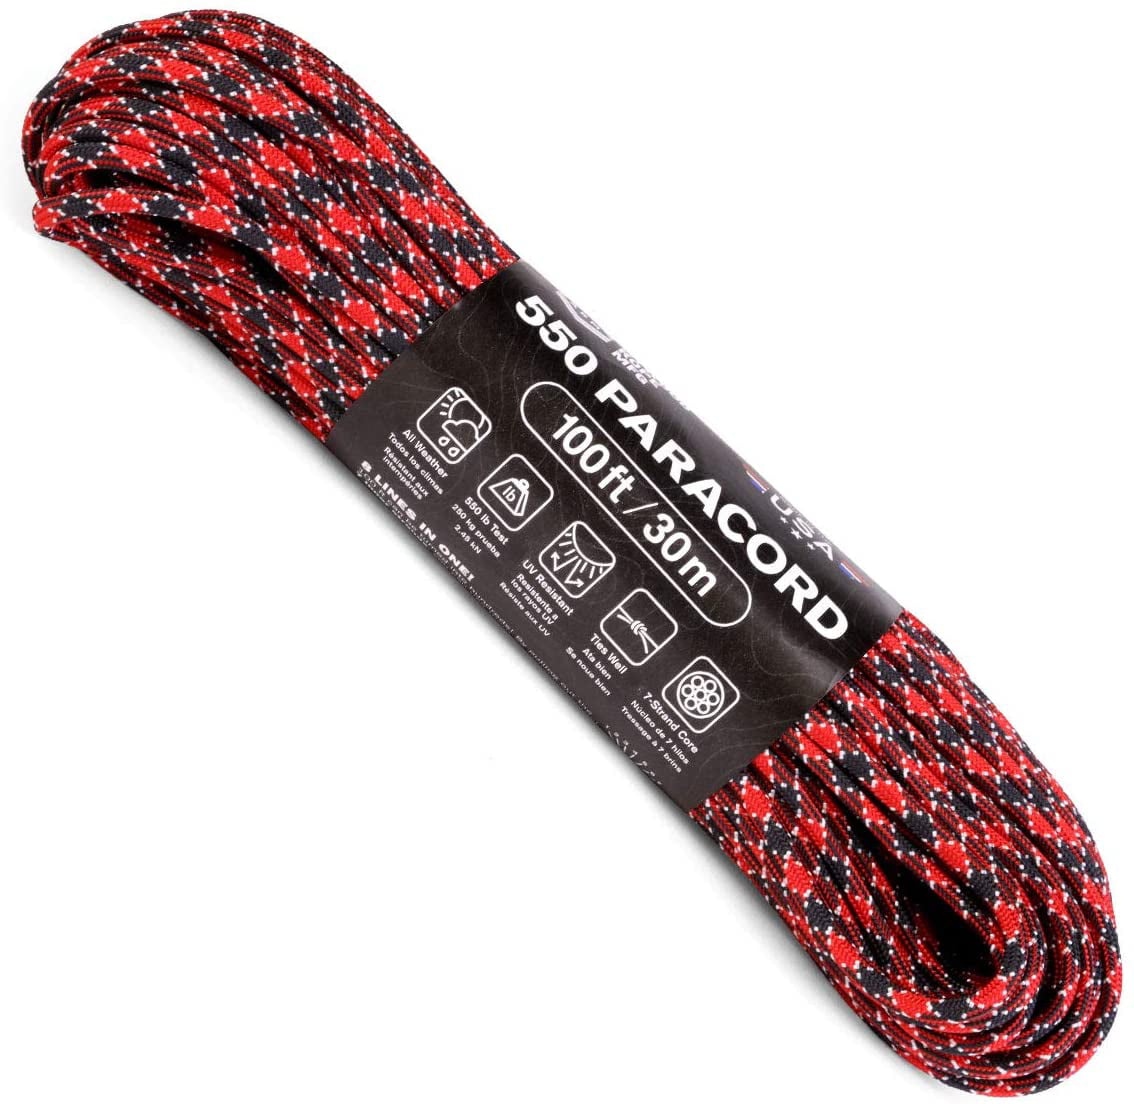 Bracelets Keychain Lanyards Atwood Rope MFG 550 Paracord 300 Feet 7-Strand Core Nylon Parachute Cord Outside Survival Gear Made in USA Handle Wraps